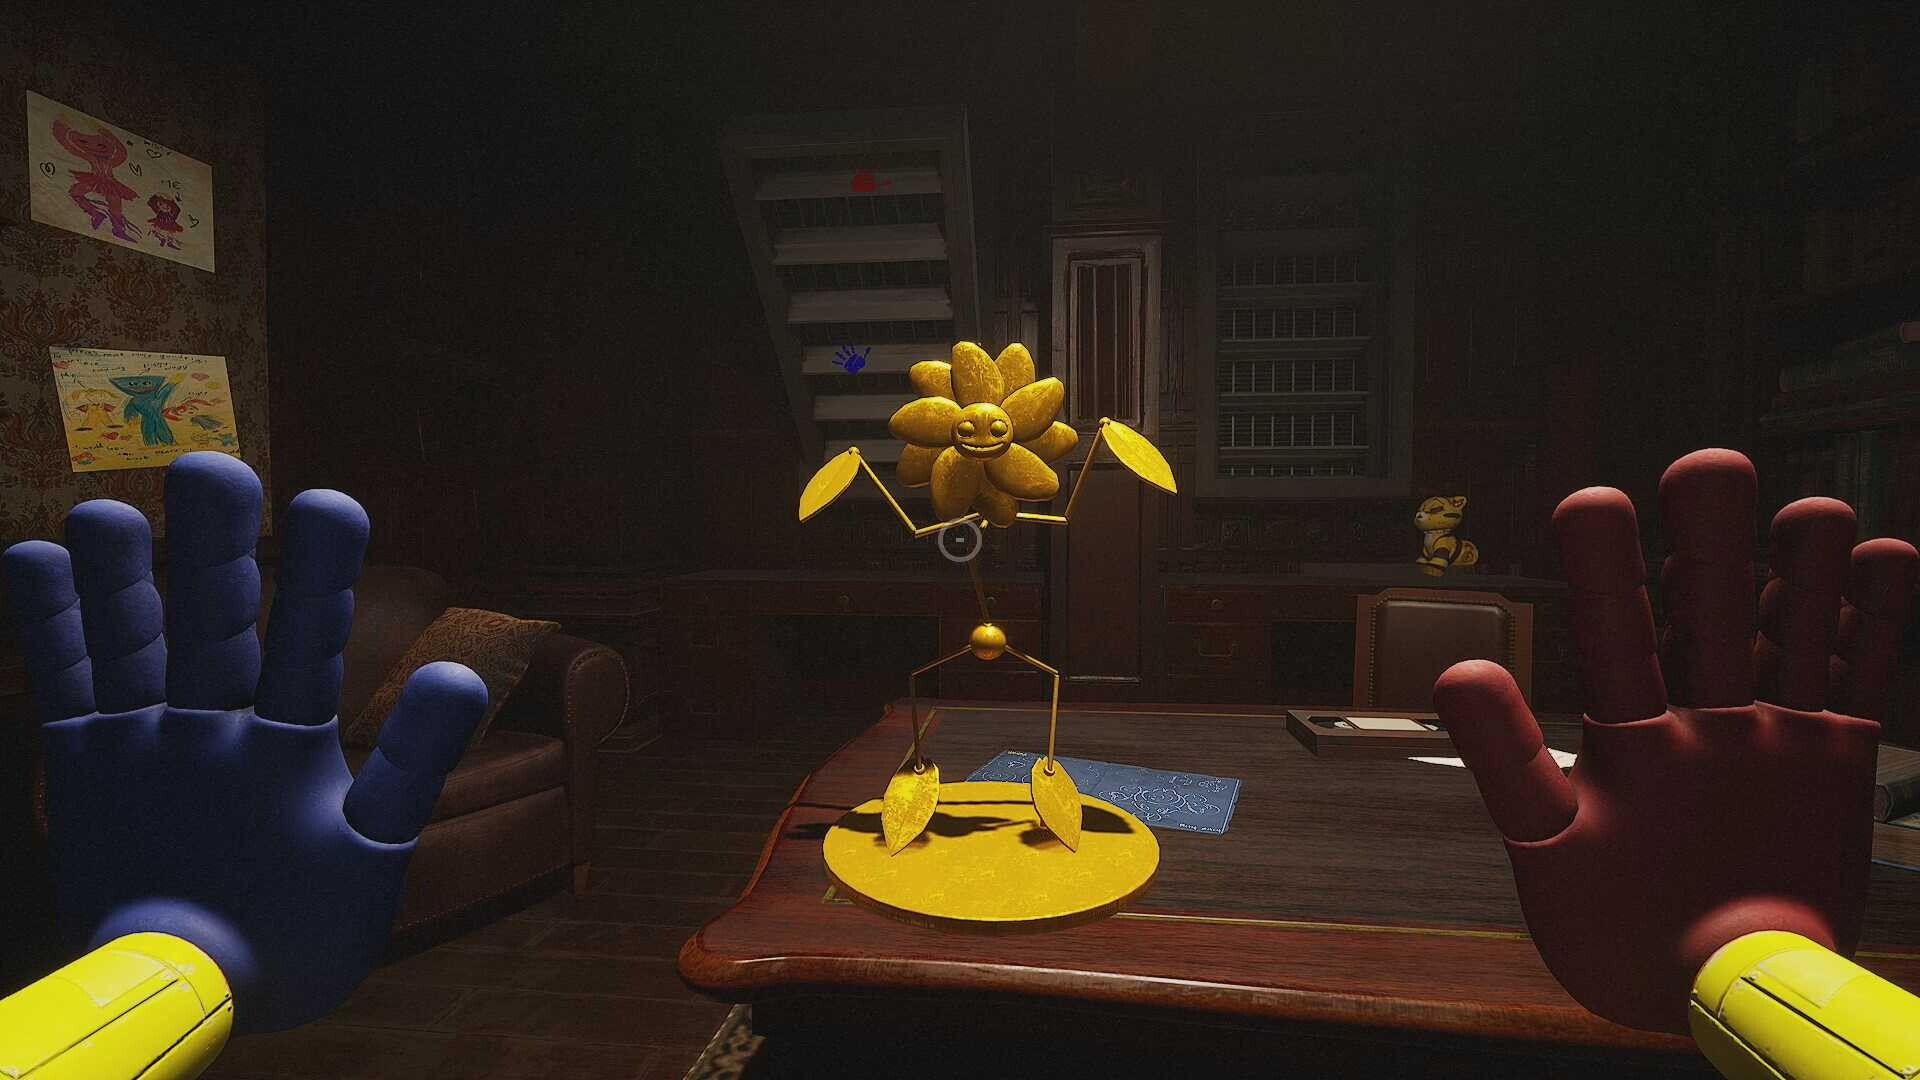 Poppy Playtime: Chapter 2, Collectibles, Statue 1: Daisy in Elliot Ludwig's office, Sitting on the desk, Adding to inventory. 1920x1080 Full HD Wallpaper.